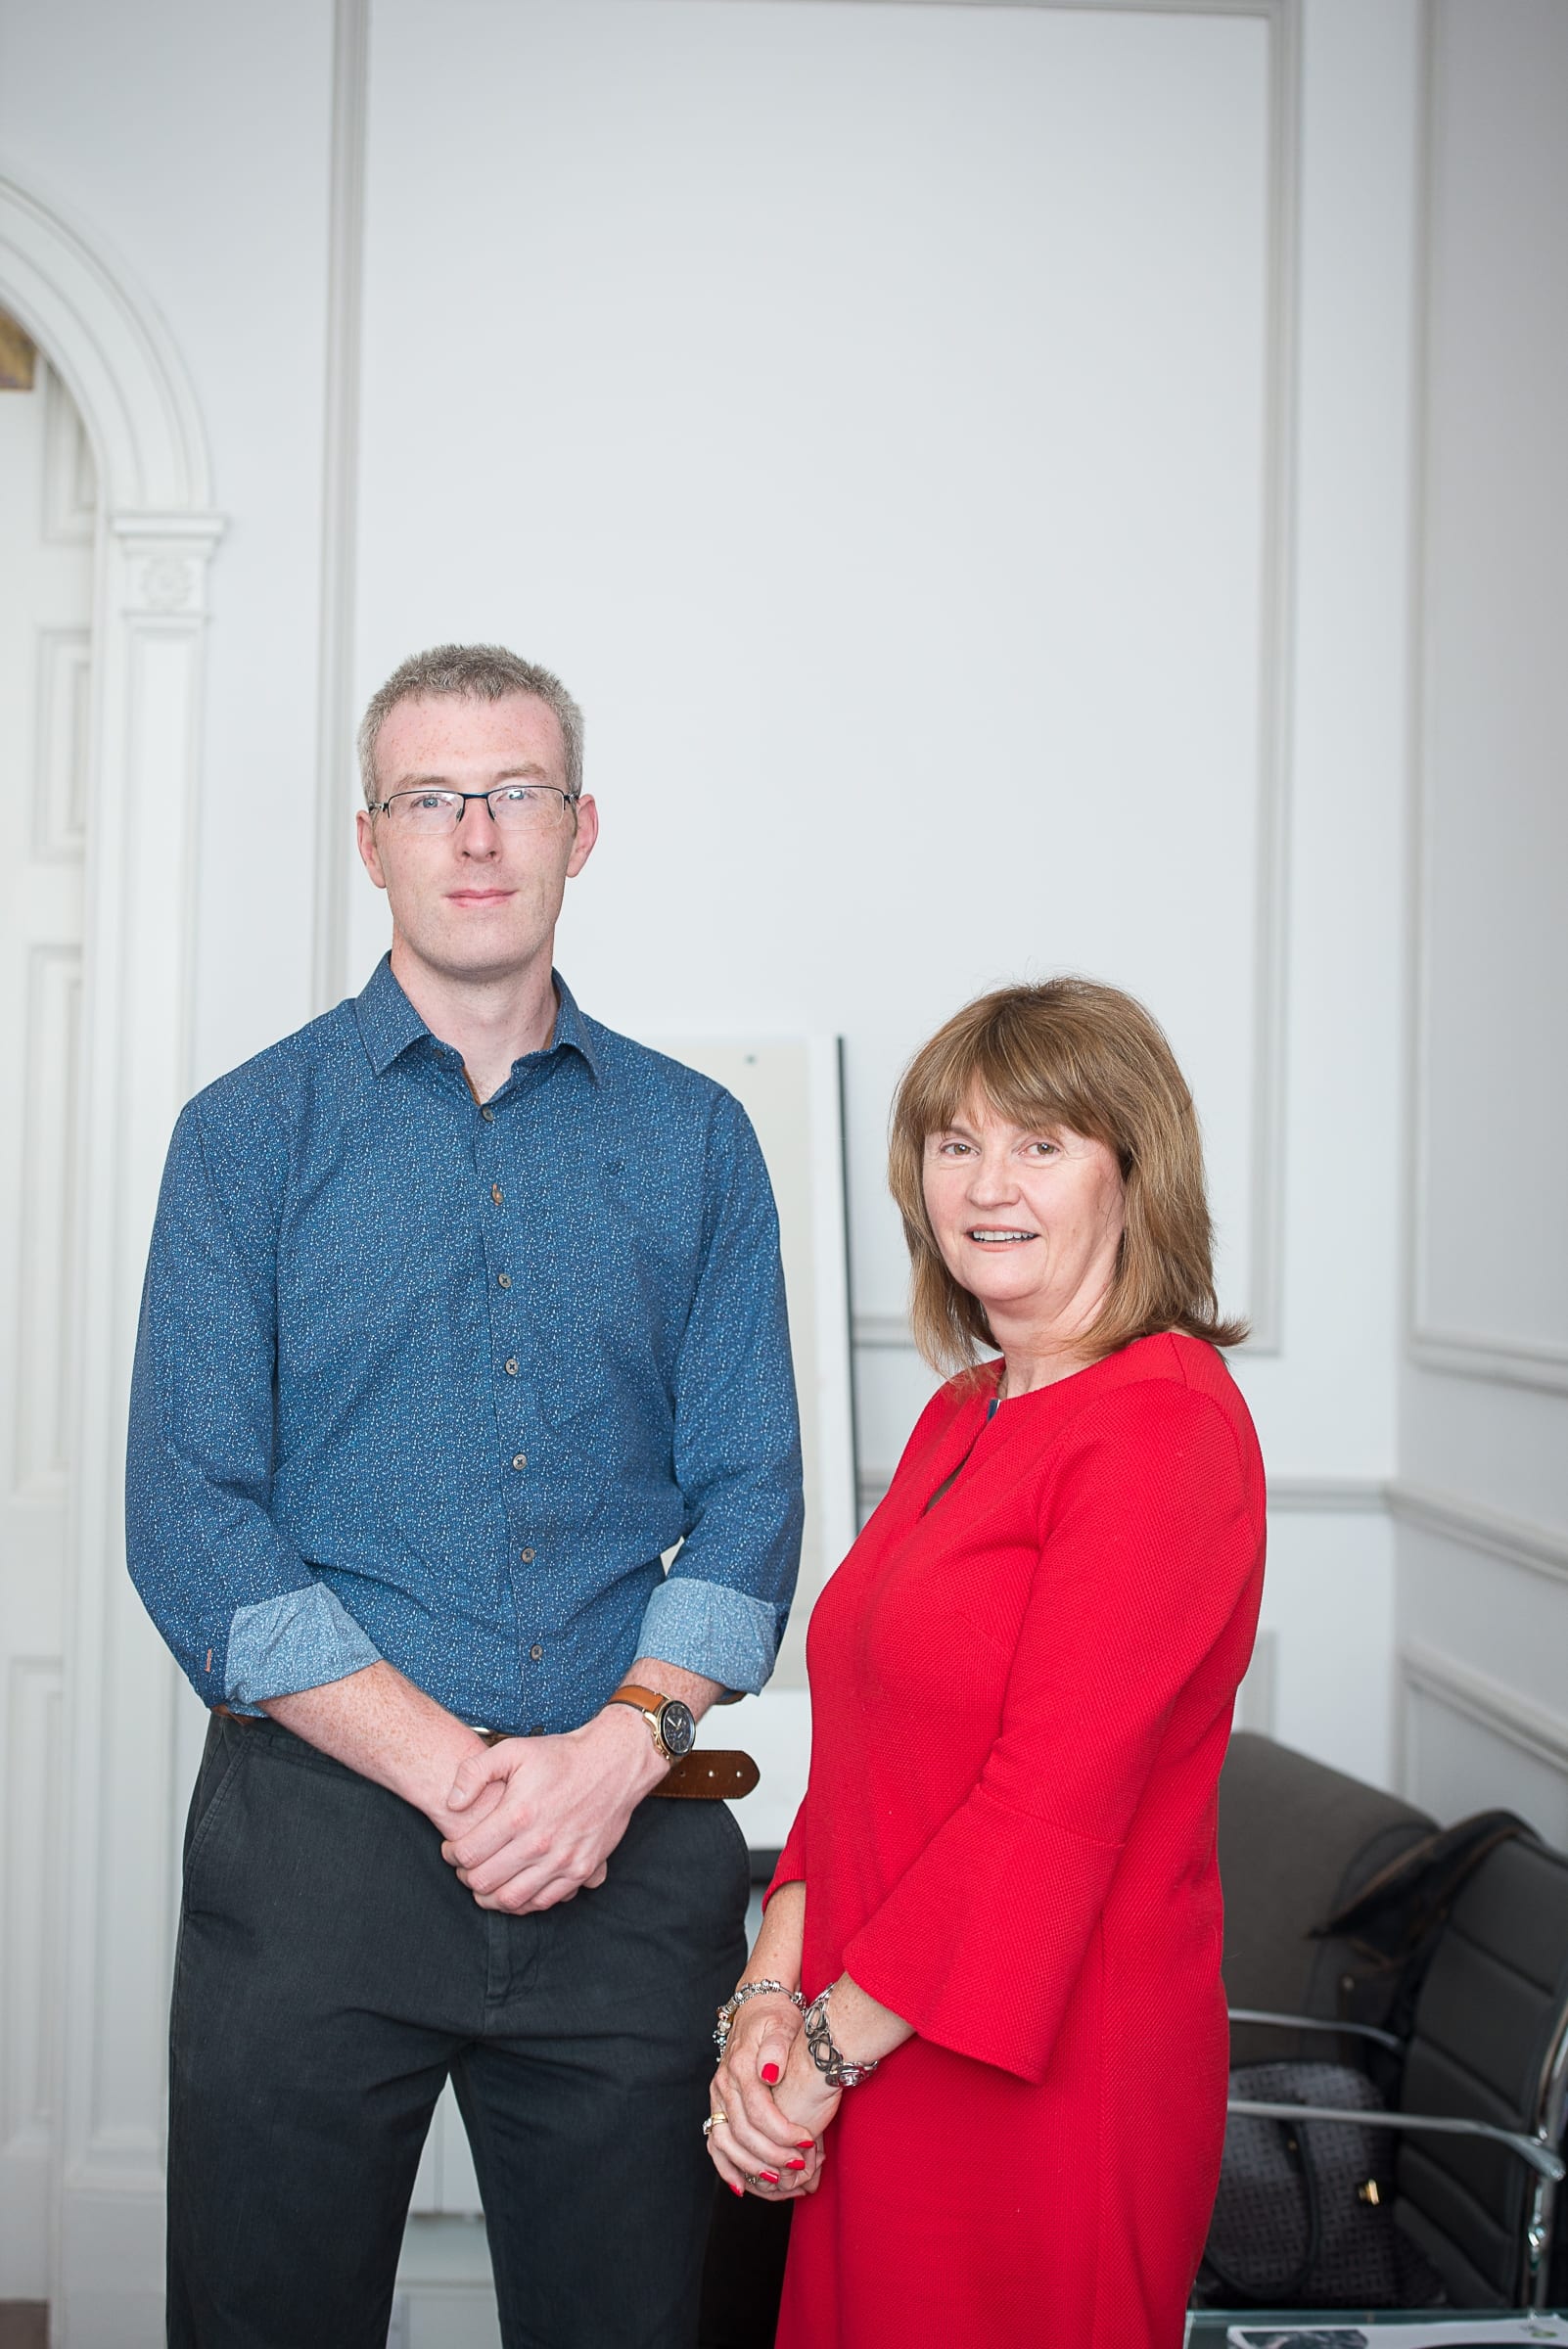 From Left to Right:  Marketing Collective Advice Clinic supported by Skillnet
which took place on the 30th May in function room of the Limerick Chamber: Eamonn Gardiner - Limerick Chamber Skillnet, Katherine Maher - National Learning Network. 
Photo by Morning Star Photography